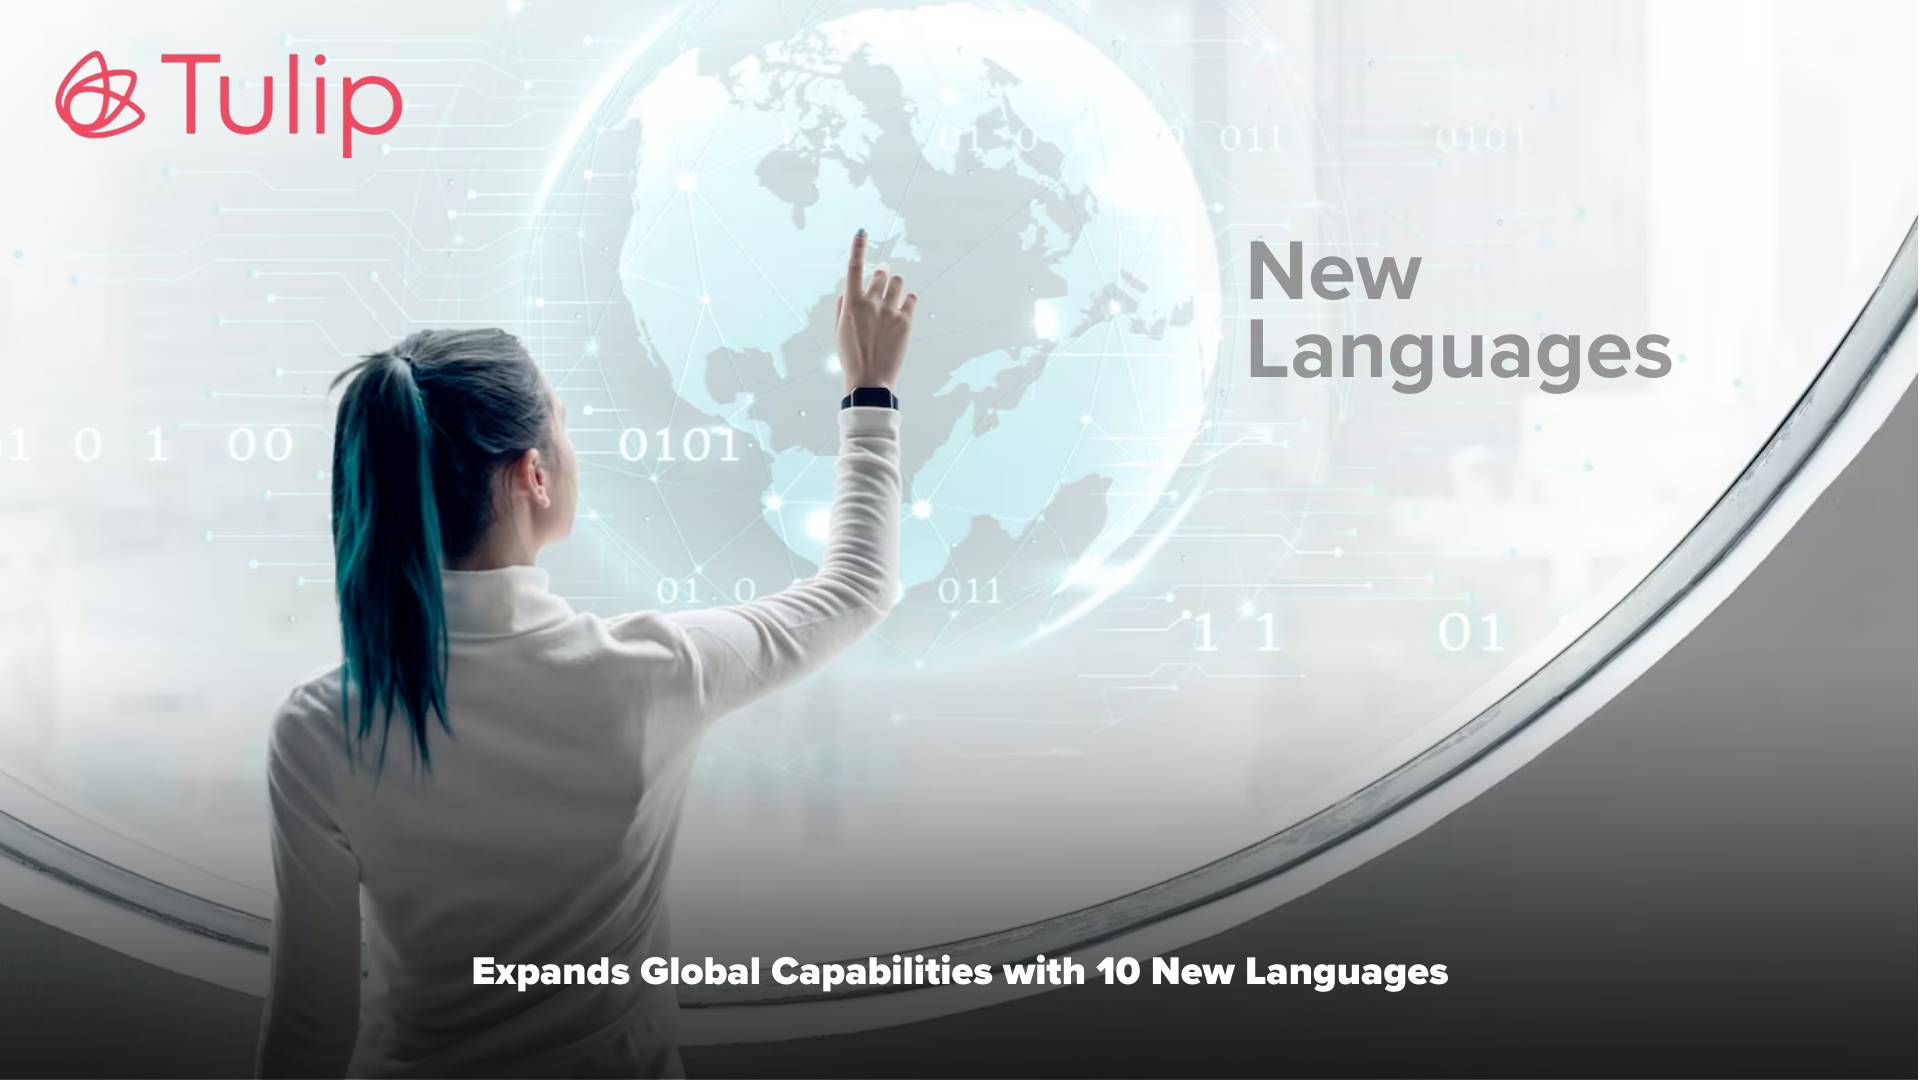 Tulip Expands Global Capabilities with 10 New Languages